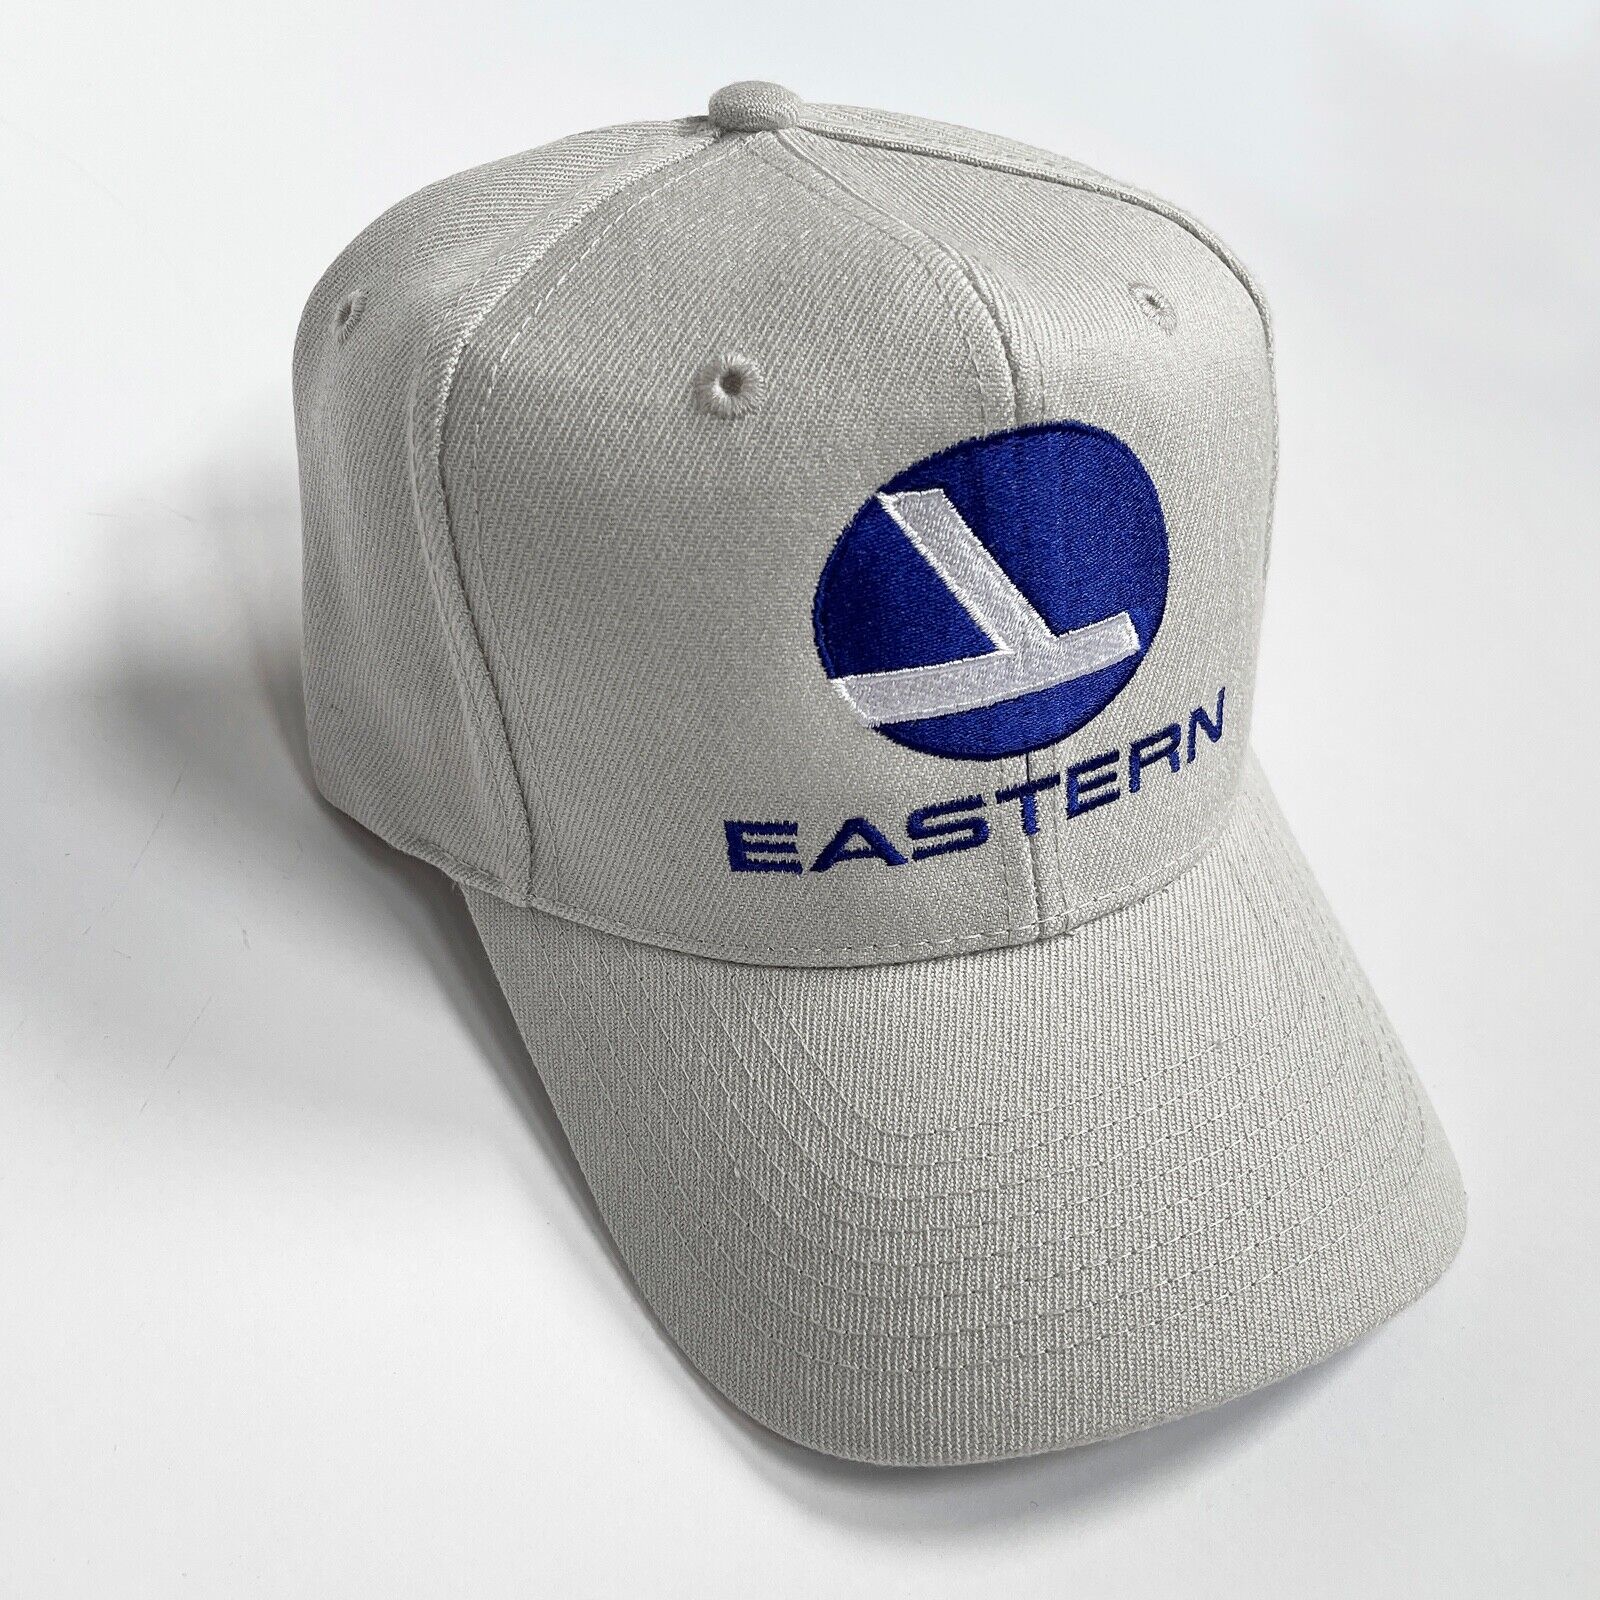 Pro-Style Authentic EASTERN AIRLINES CREW CAP - Brand New, Unworn & Collectible